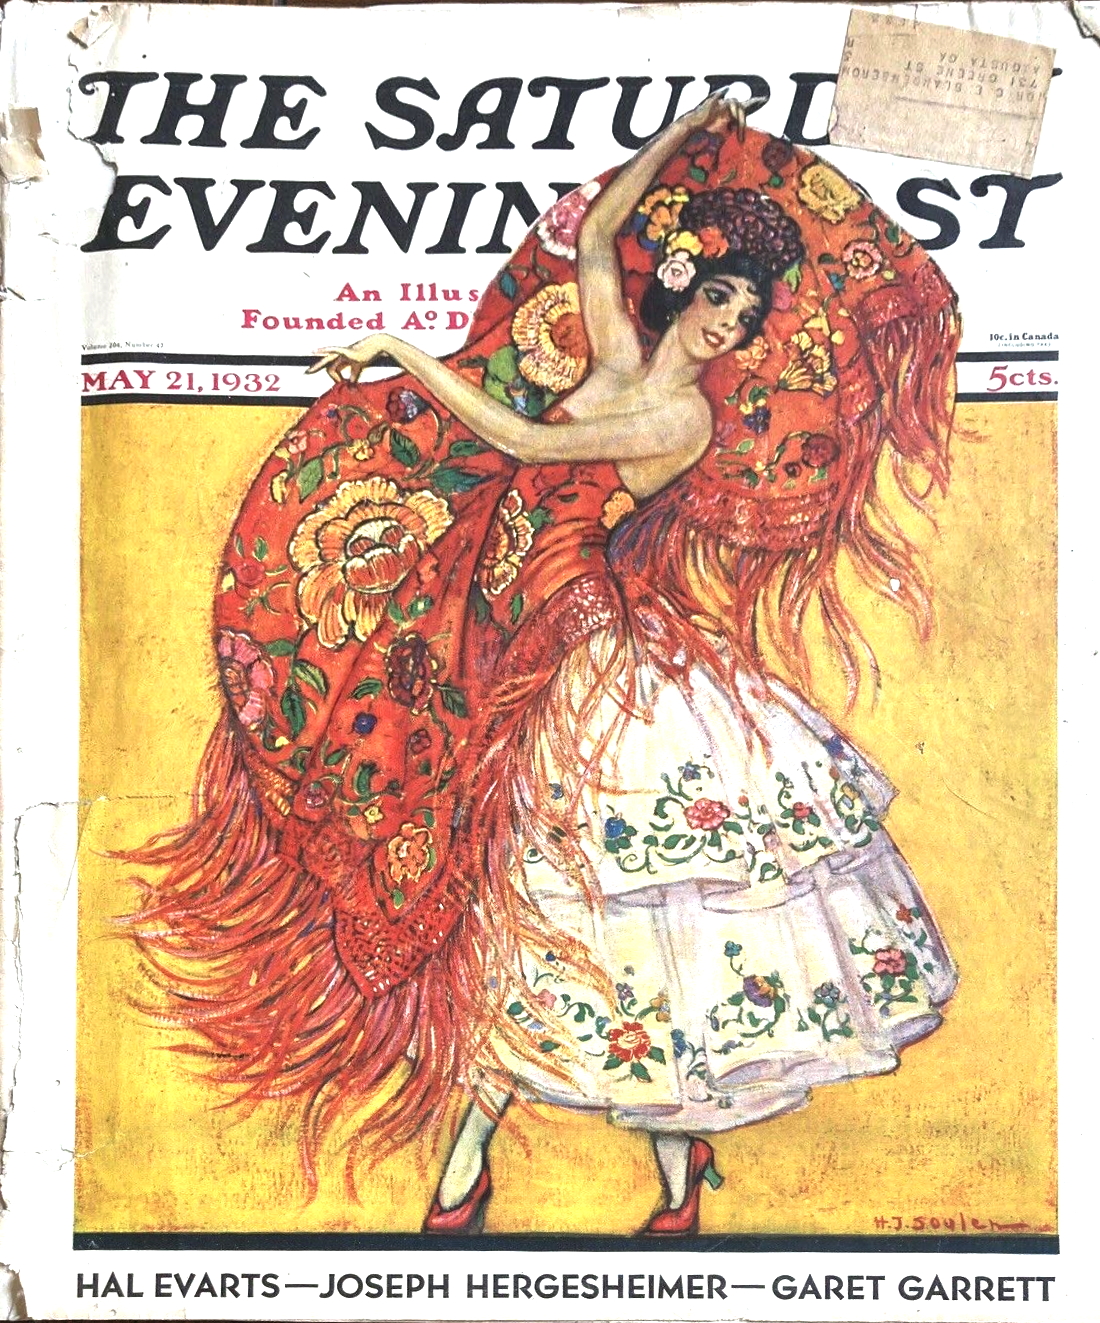 H.J. Soulen - The Saturday Evening Post - May 21 1932